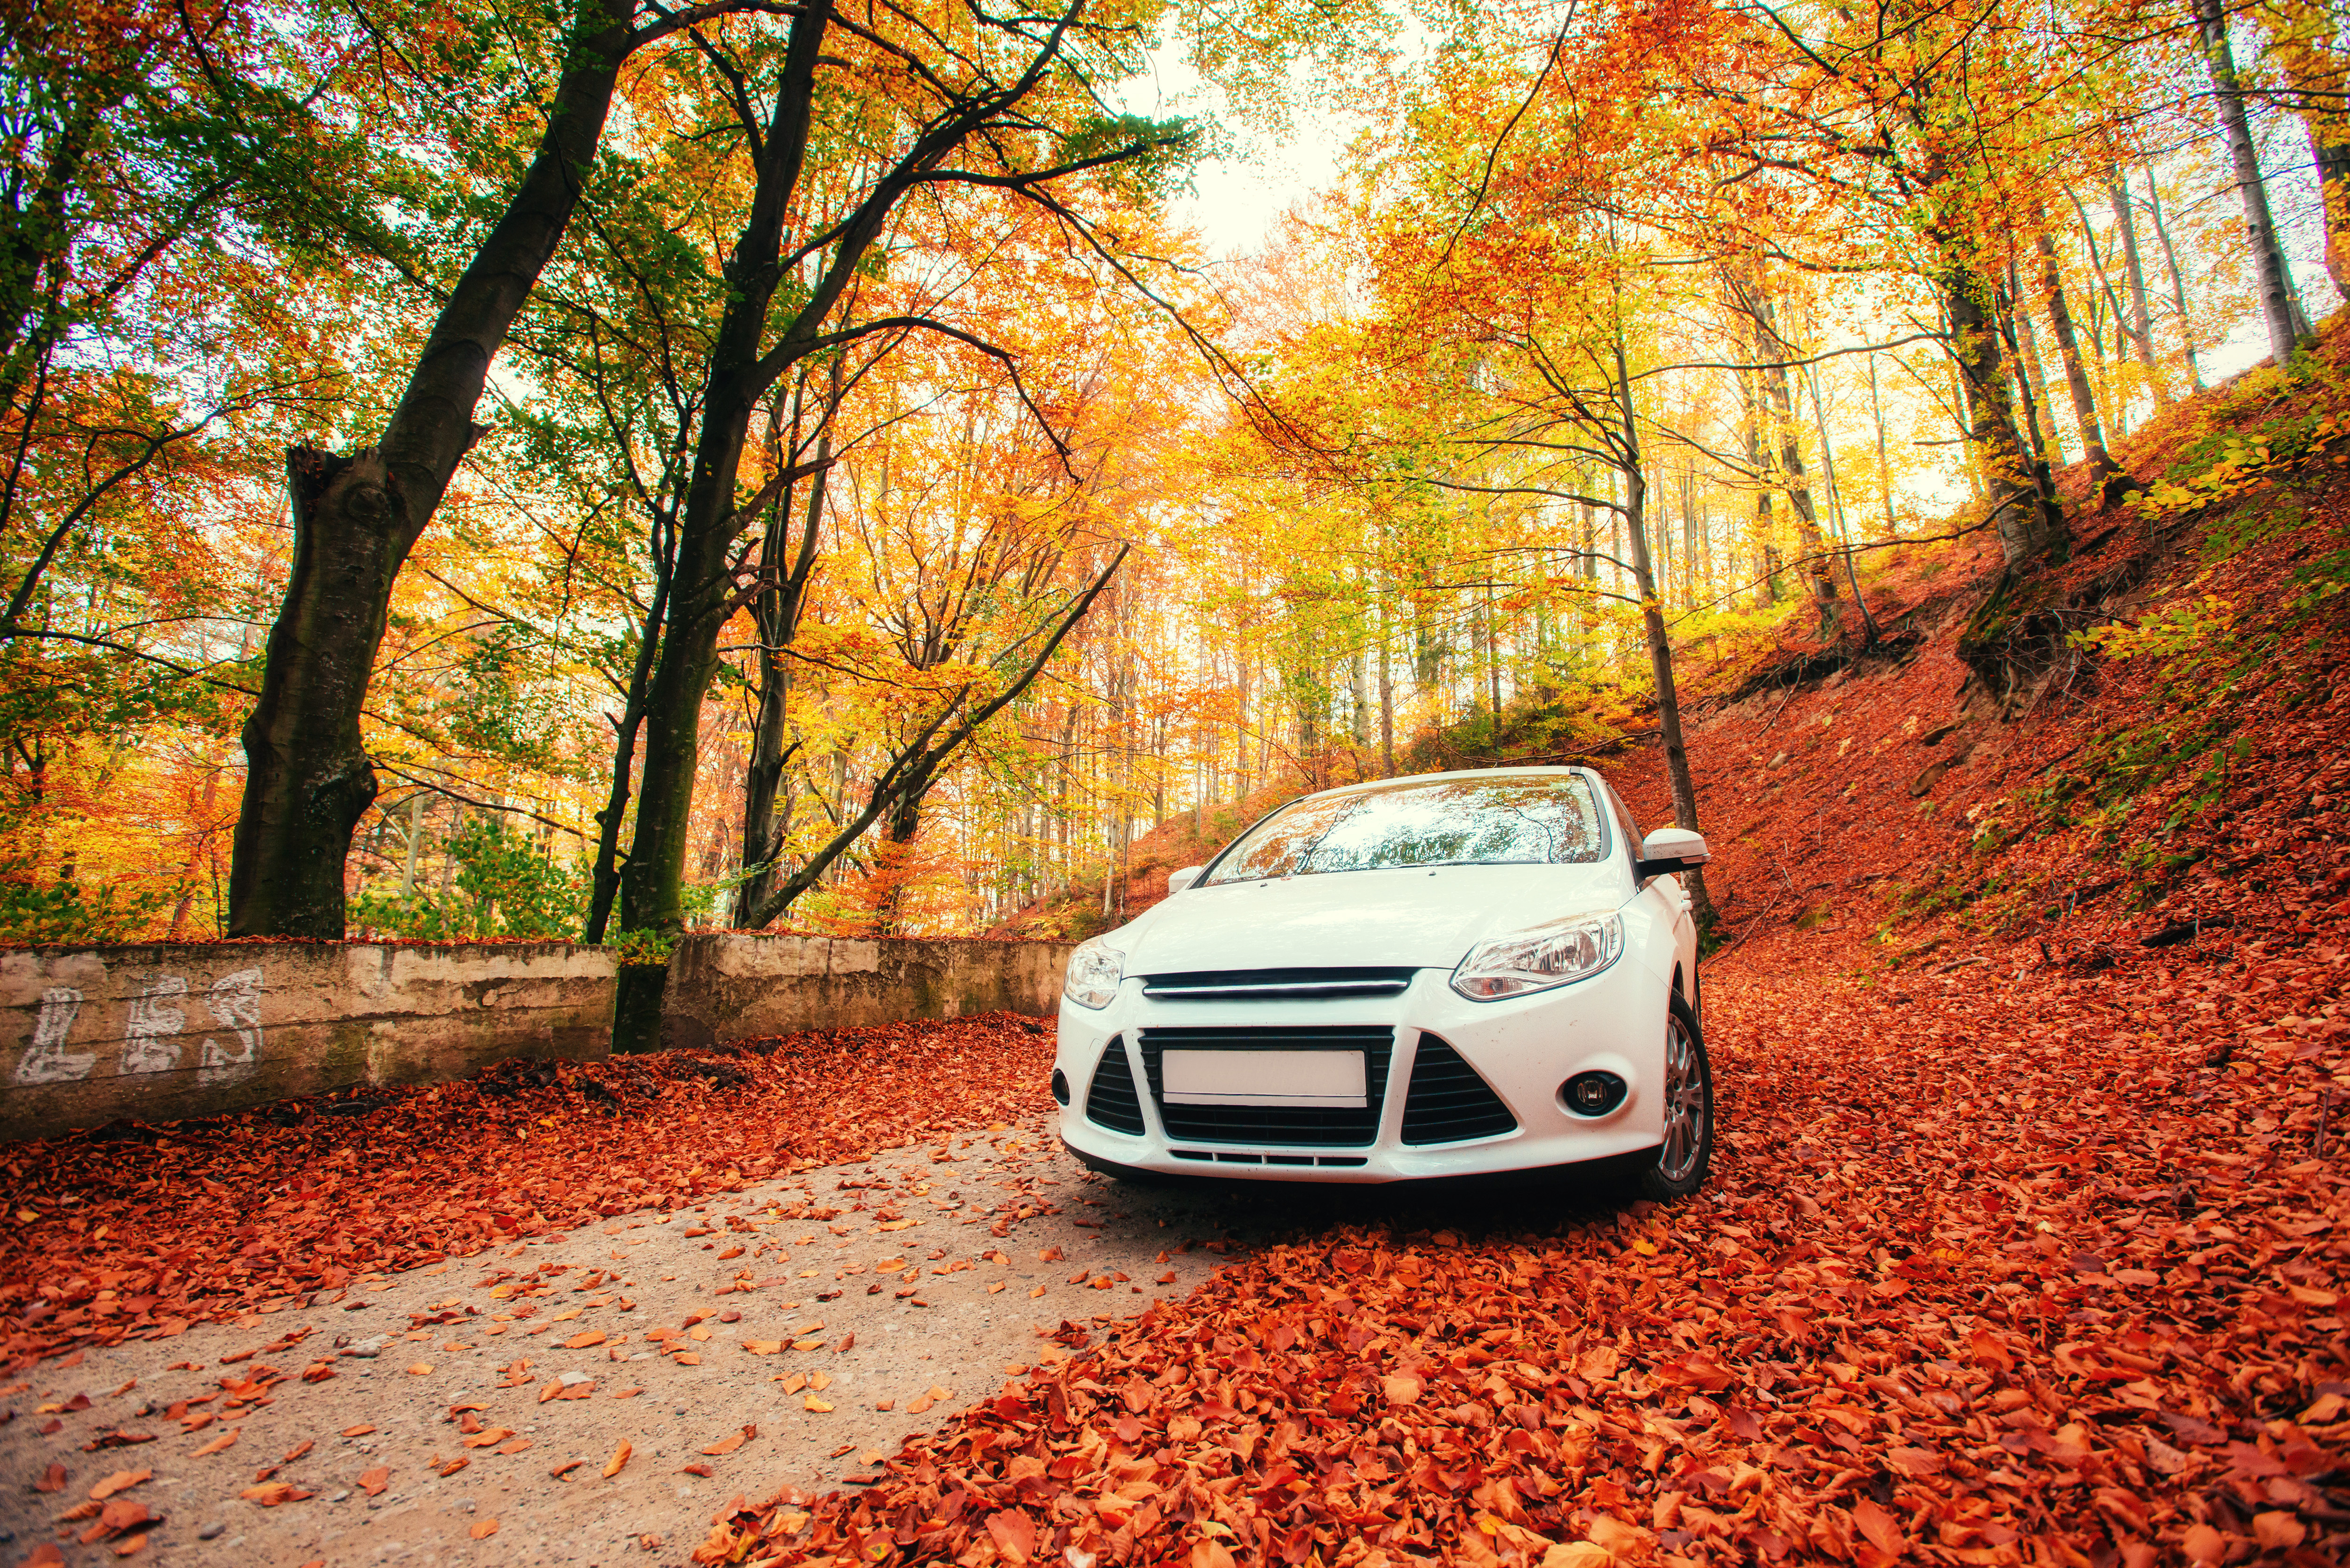 Getting Your Car Ready for Cooler Weather